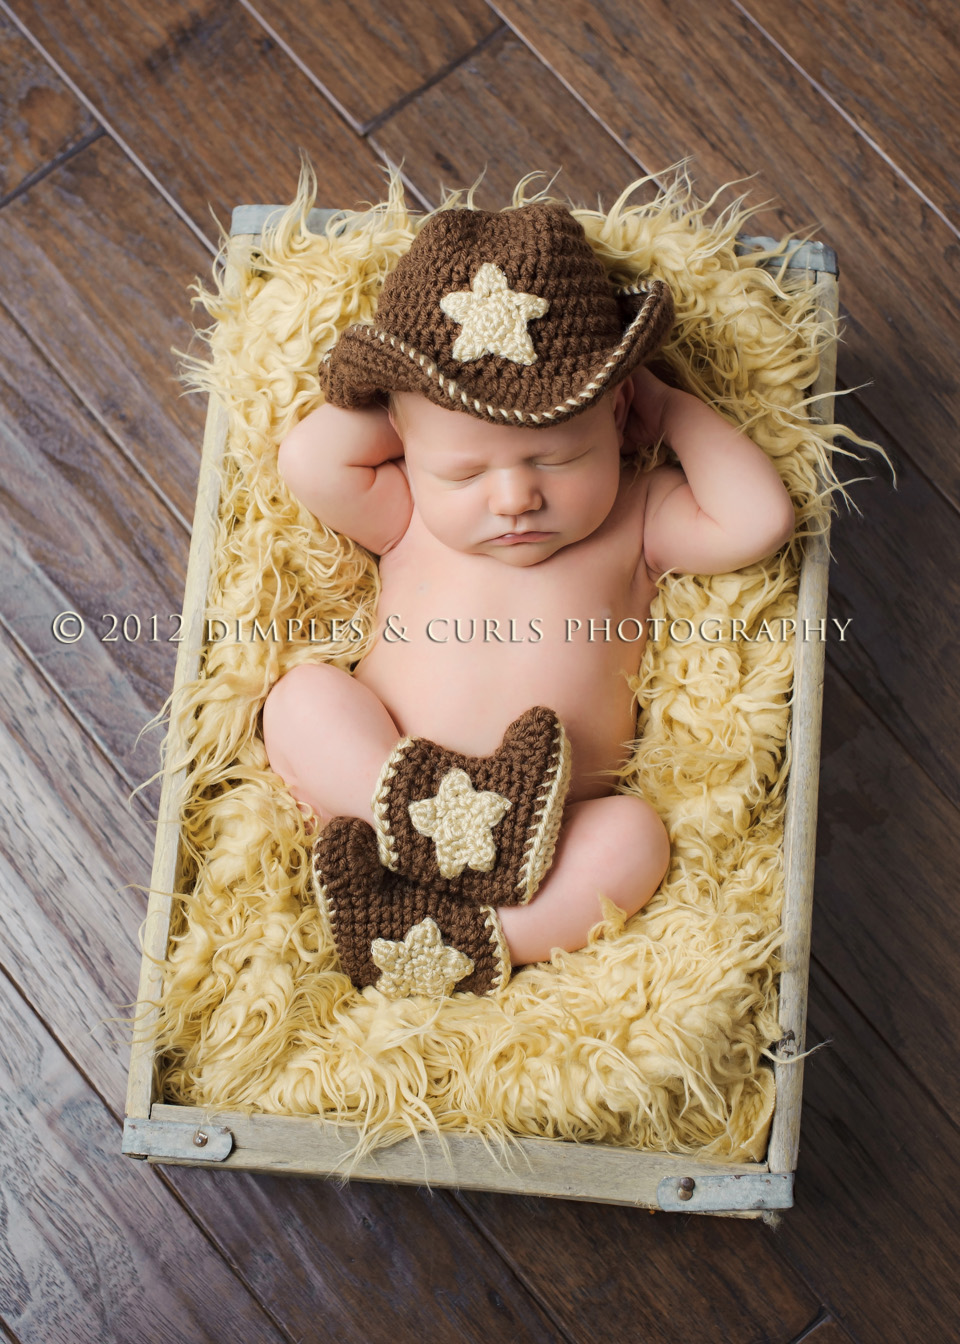 newborn photography community critique photo submitted by Christine Bryk - 4 community members set this photo as a favourite image.